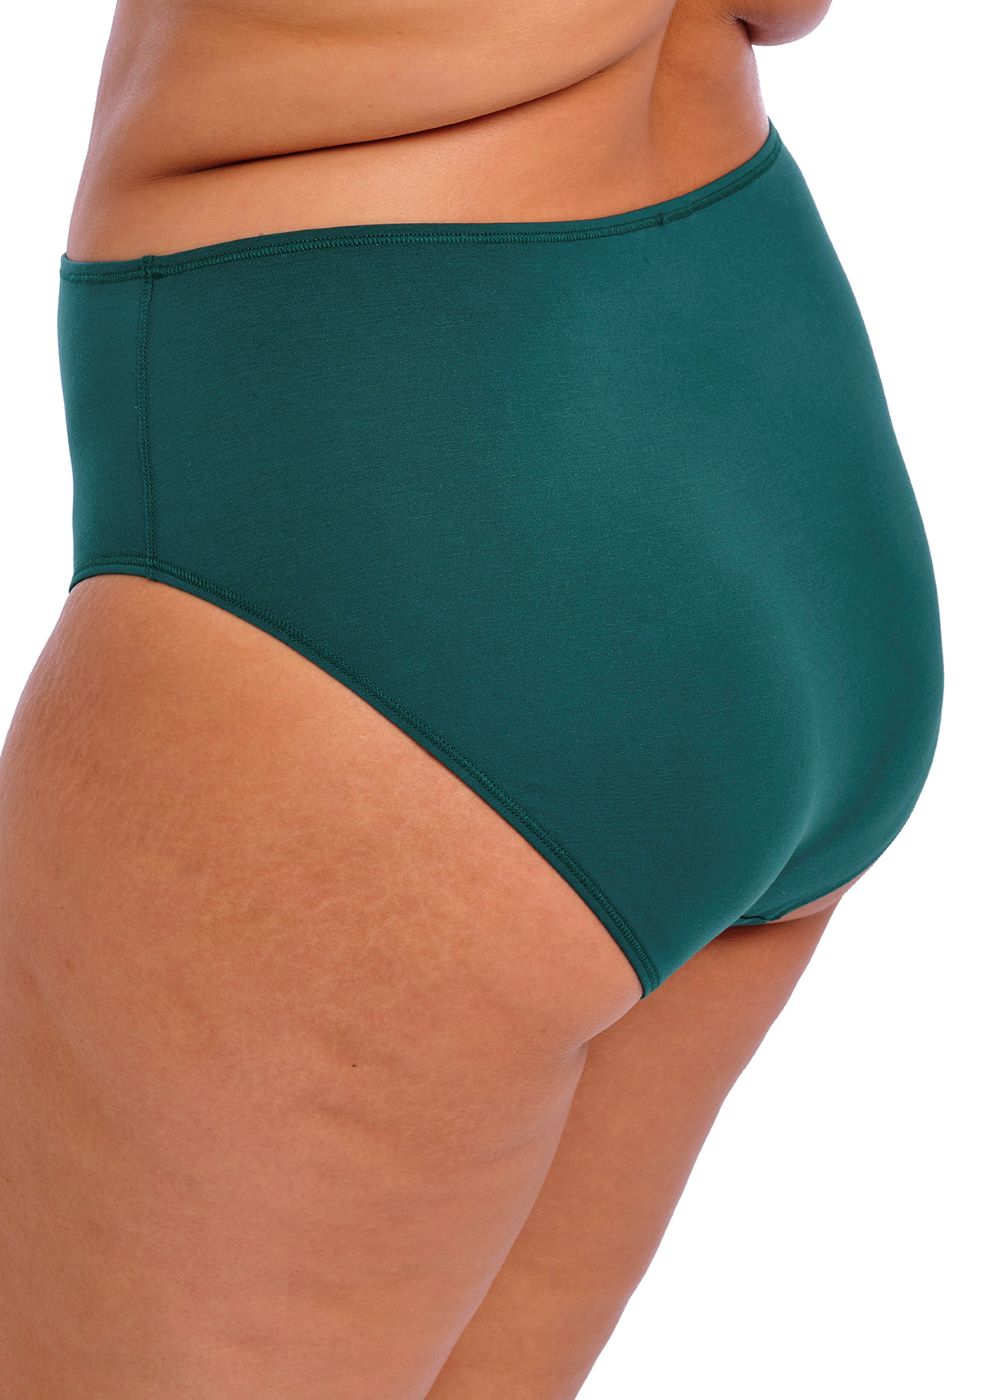 Smooth Full Brief - Deep Teal worn by model back view